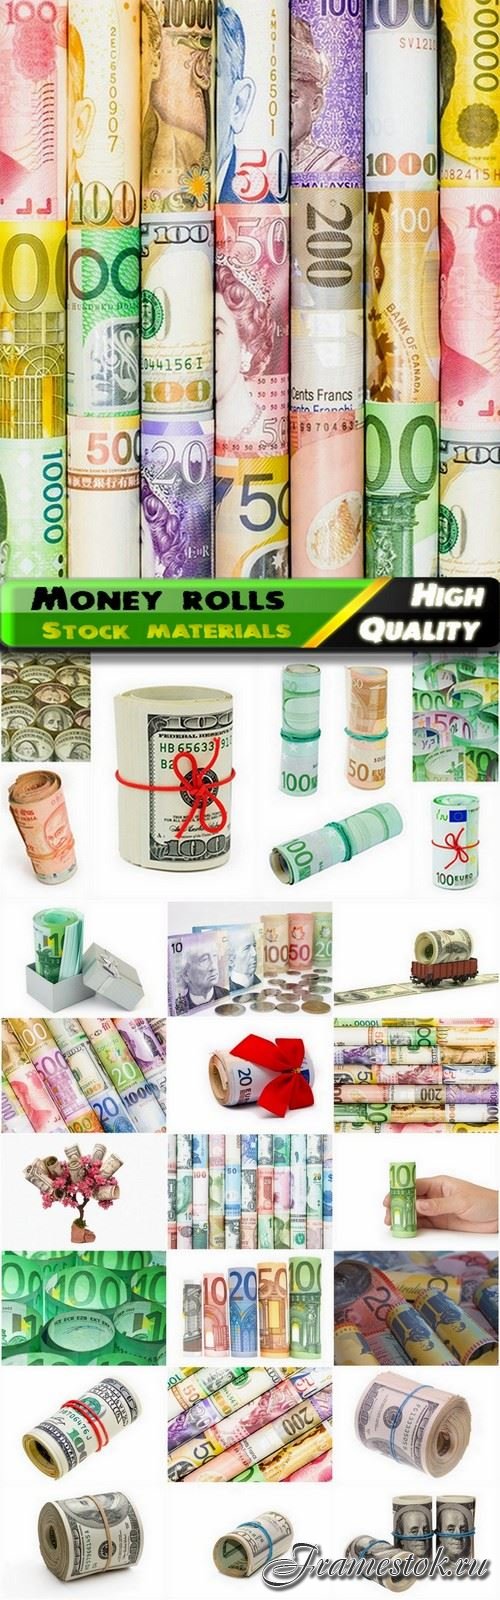 Money roll backgrounds for business - 25 HQ Jpg